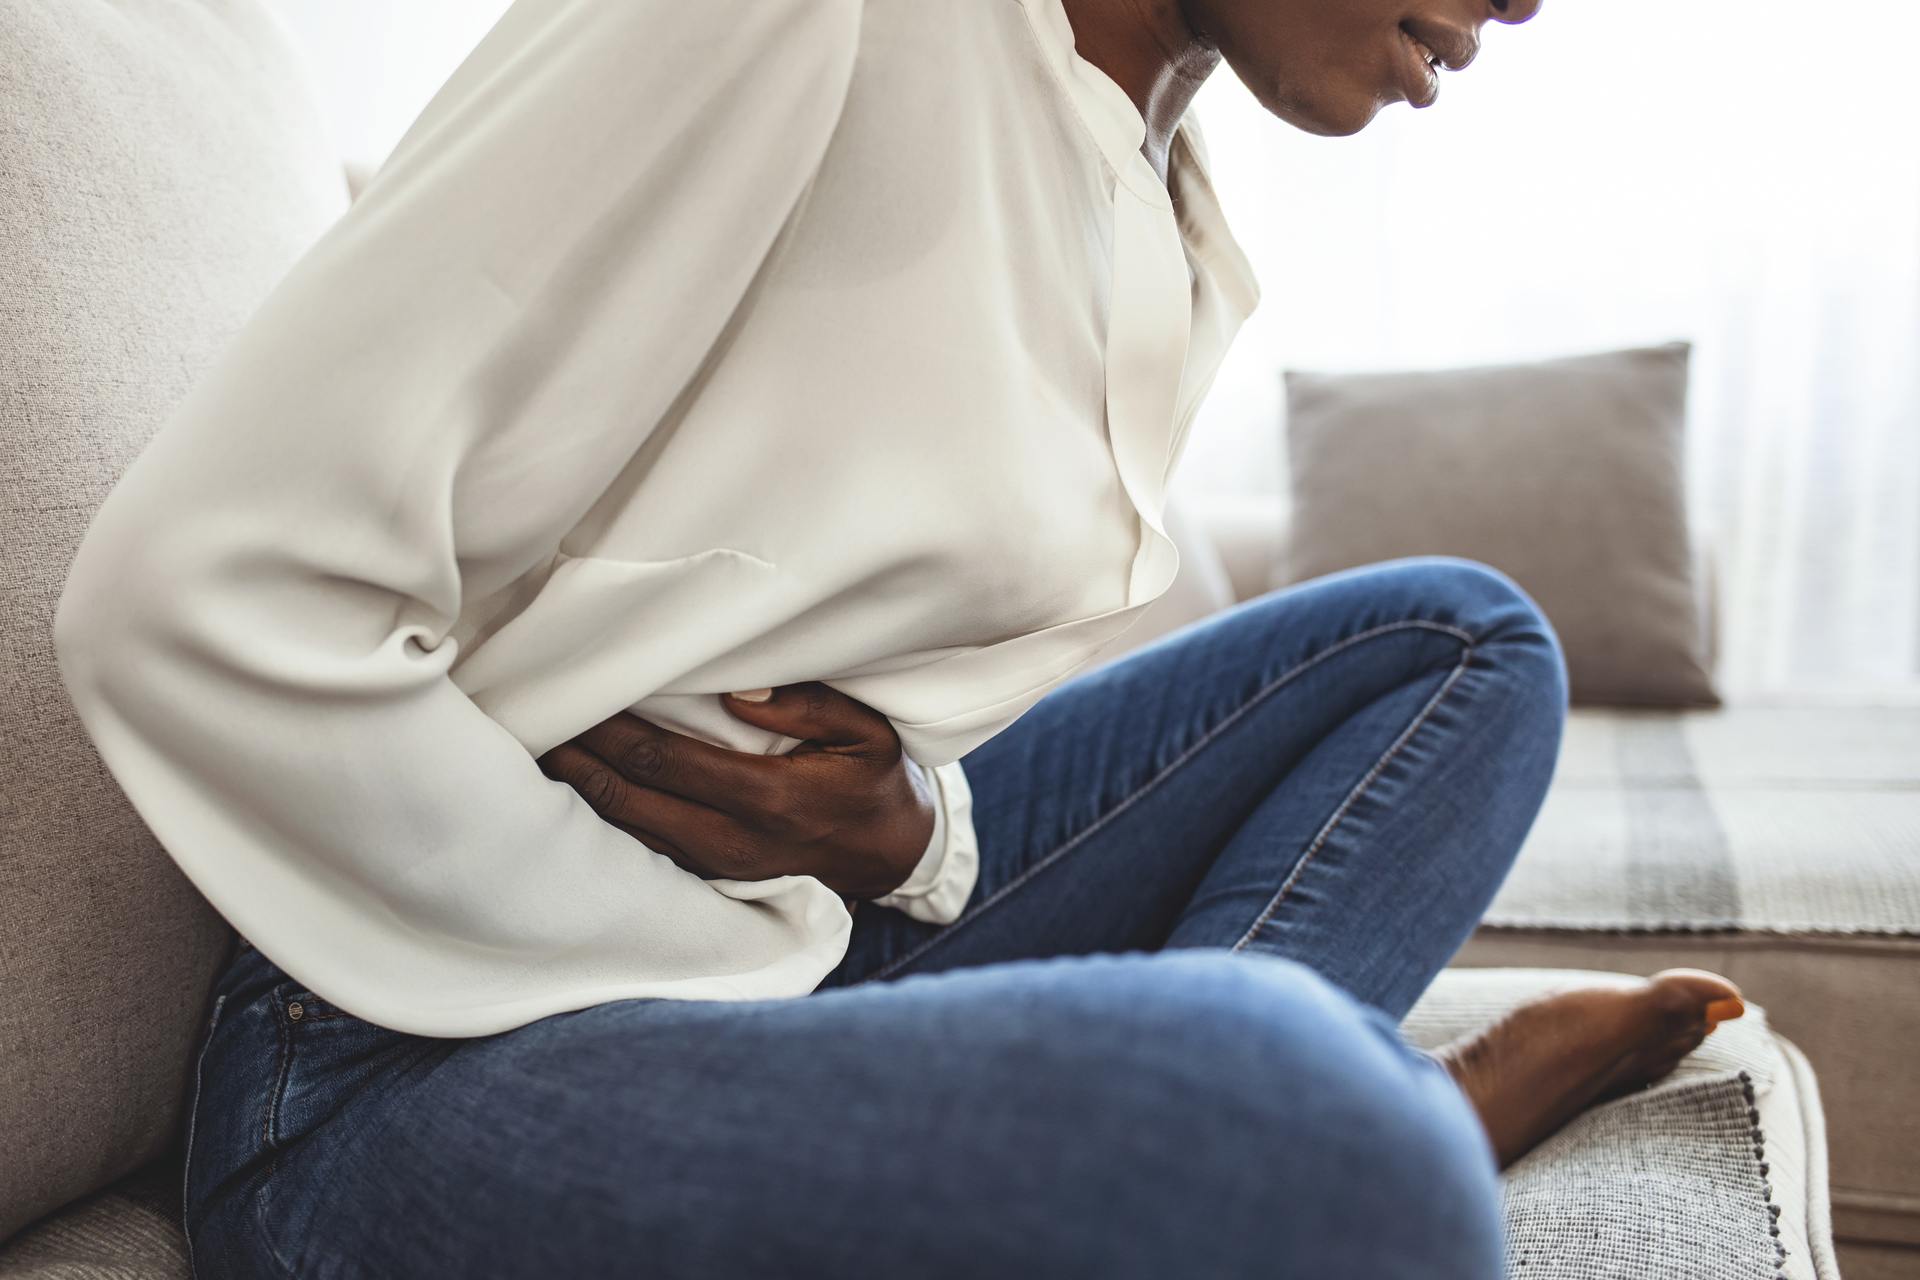 A woman holding her stomach in pain wearing an off-white blouse and blue jeans sitting on the couch.